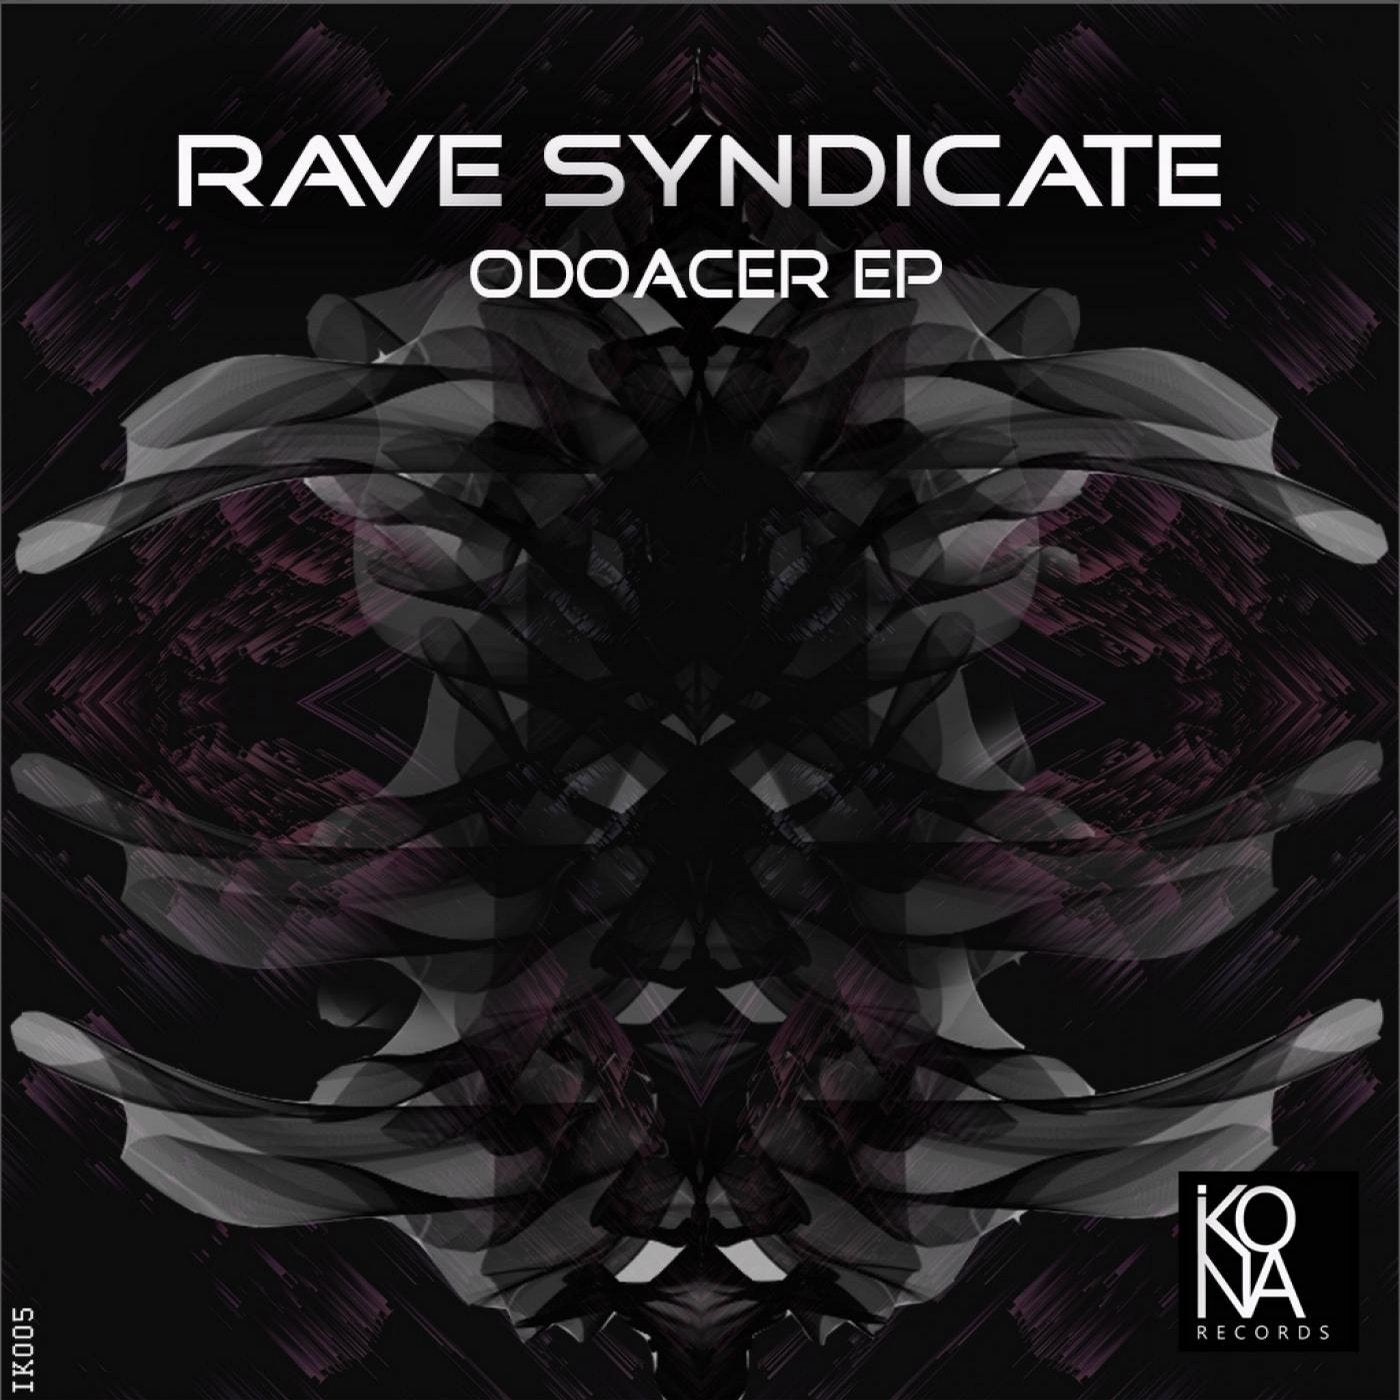 Odoacer Ep